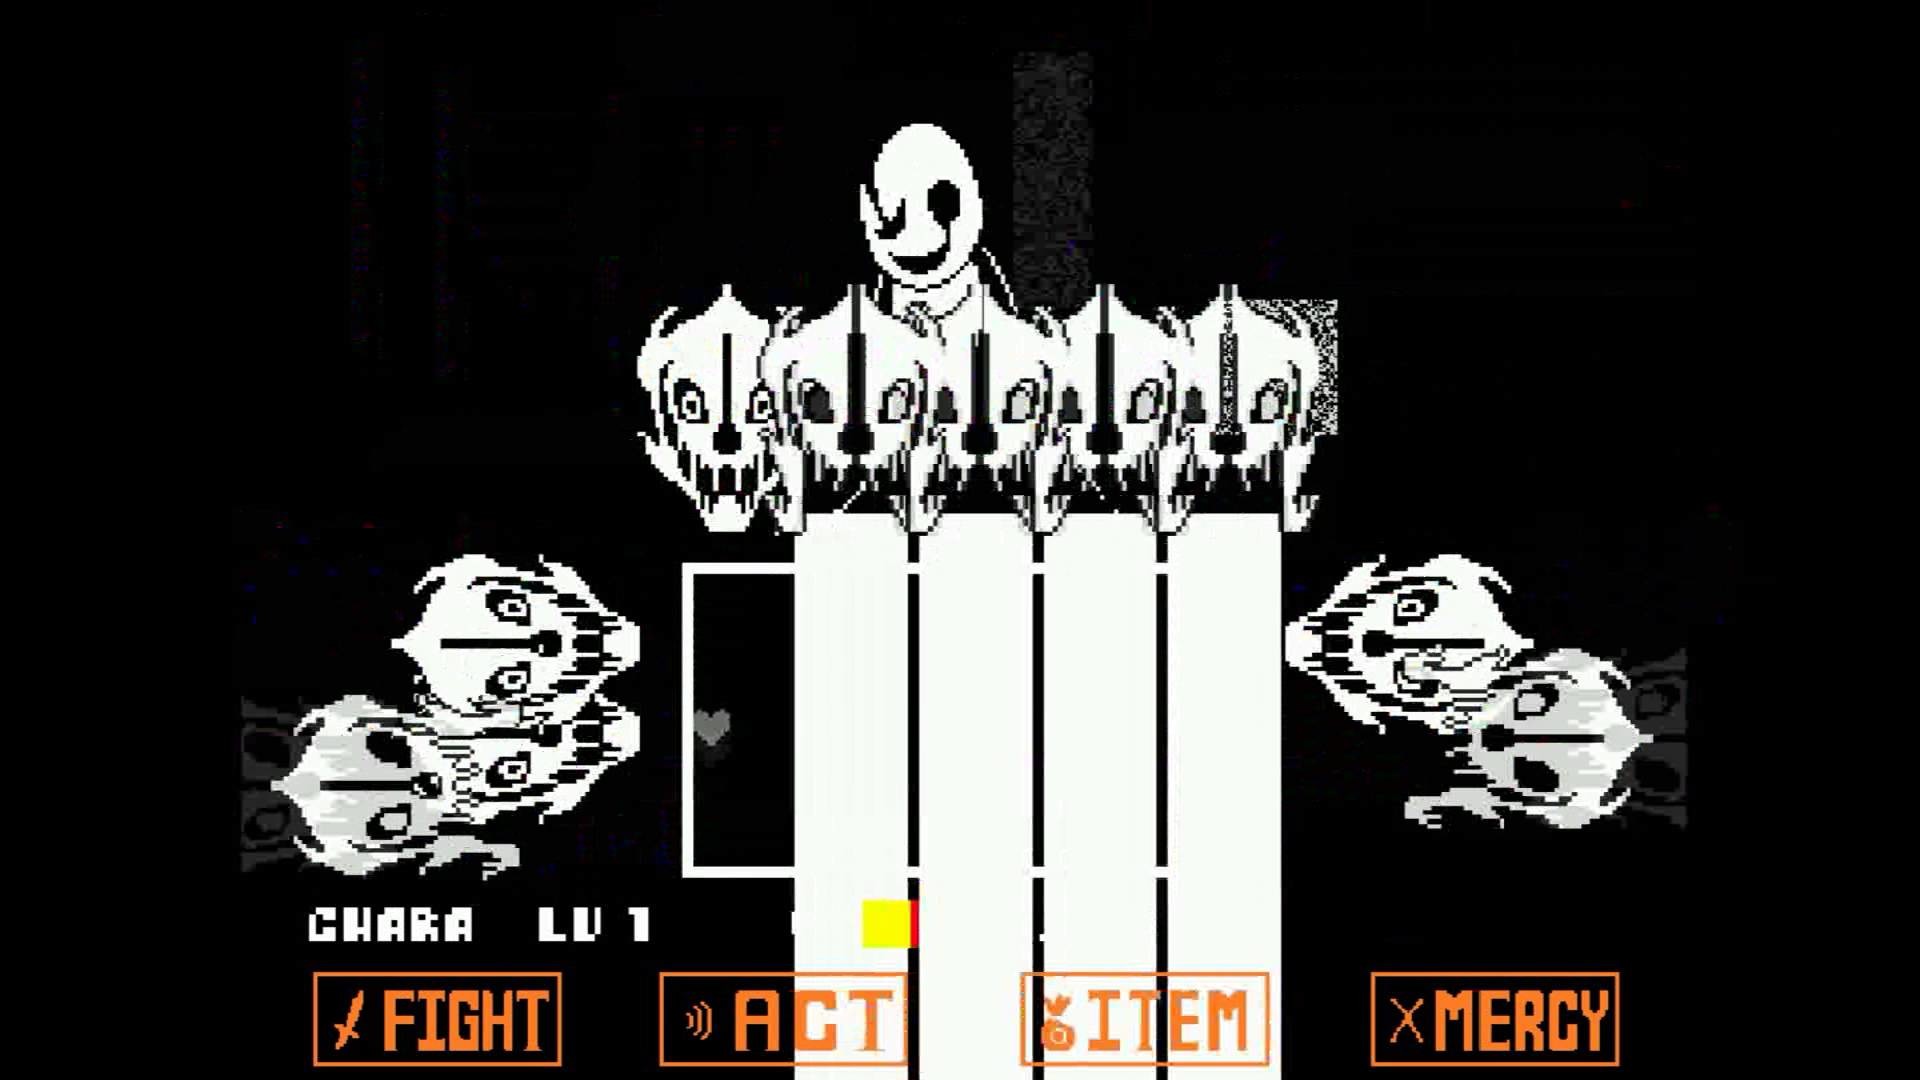 1920x1080 Undertale - Pacifist Sans and WD Gaster fight (fanmade game)